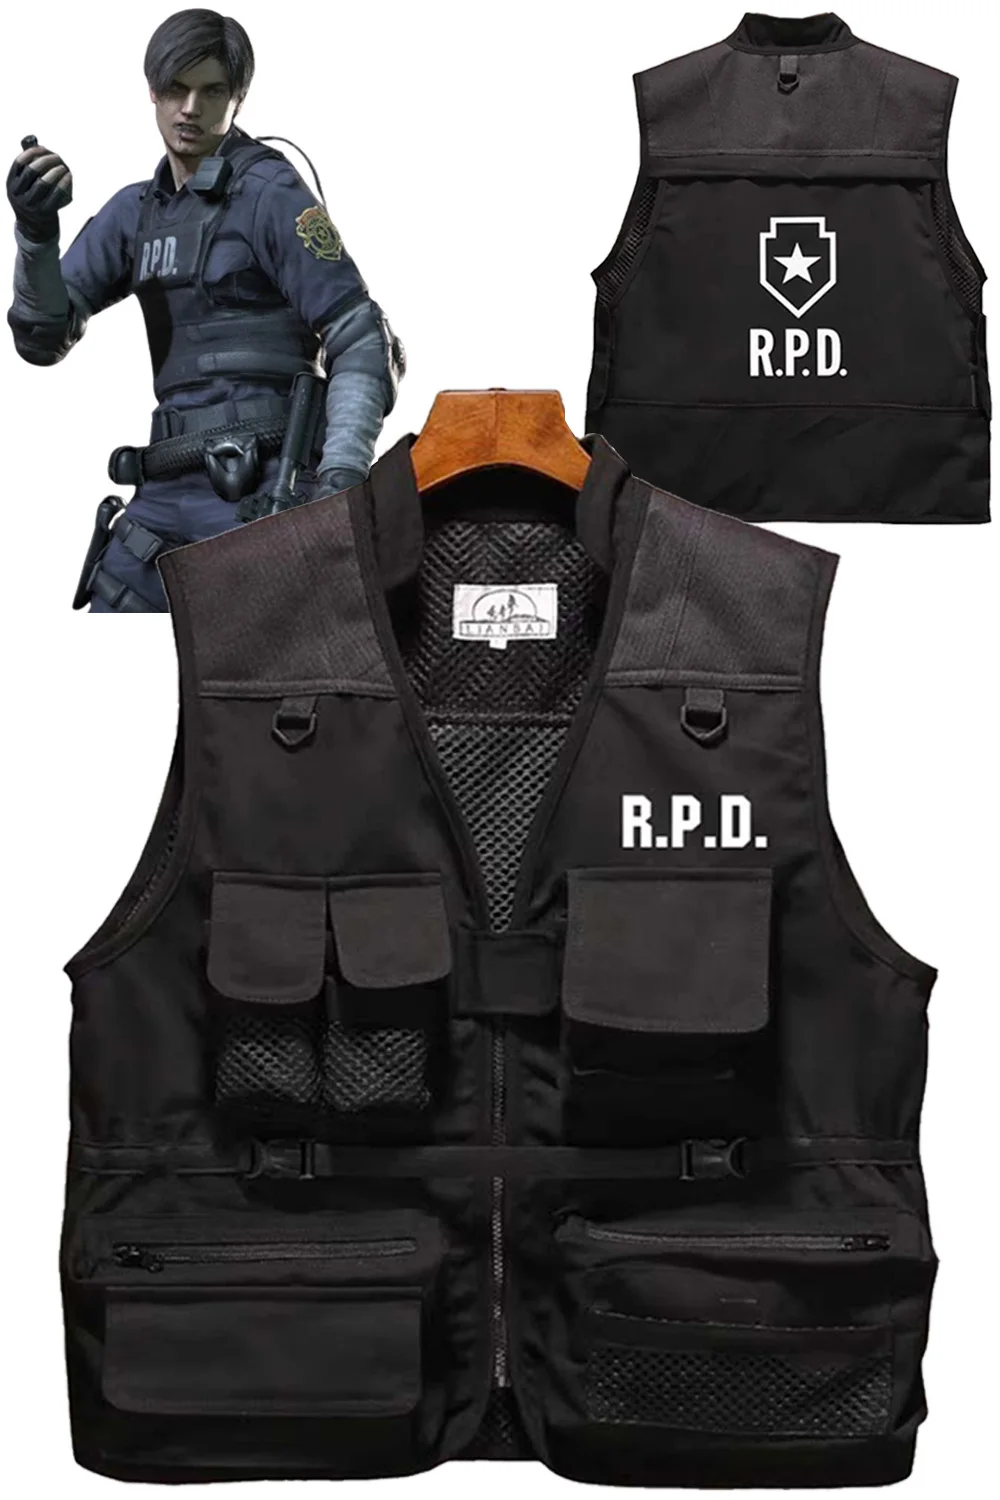 

RPD Cosplay Vest Top Costume Game Resident Cospalay Evil Roleplay Outfit Black Sleeveless Jacket Unisex Halloween Party Suits